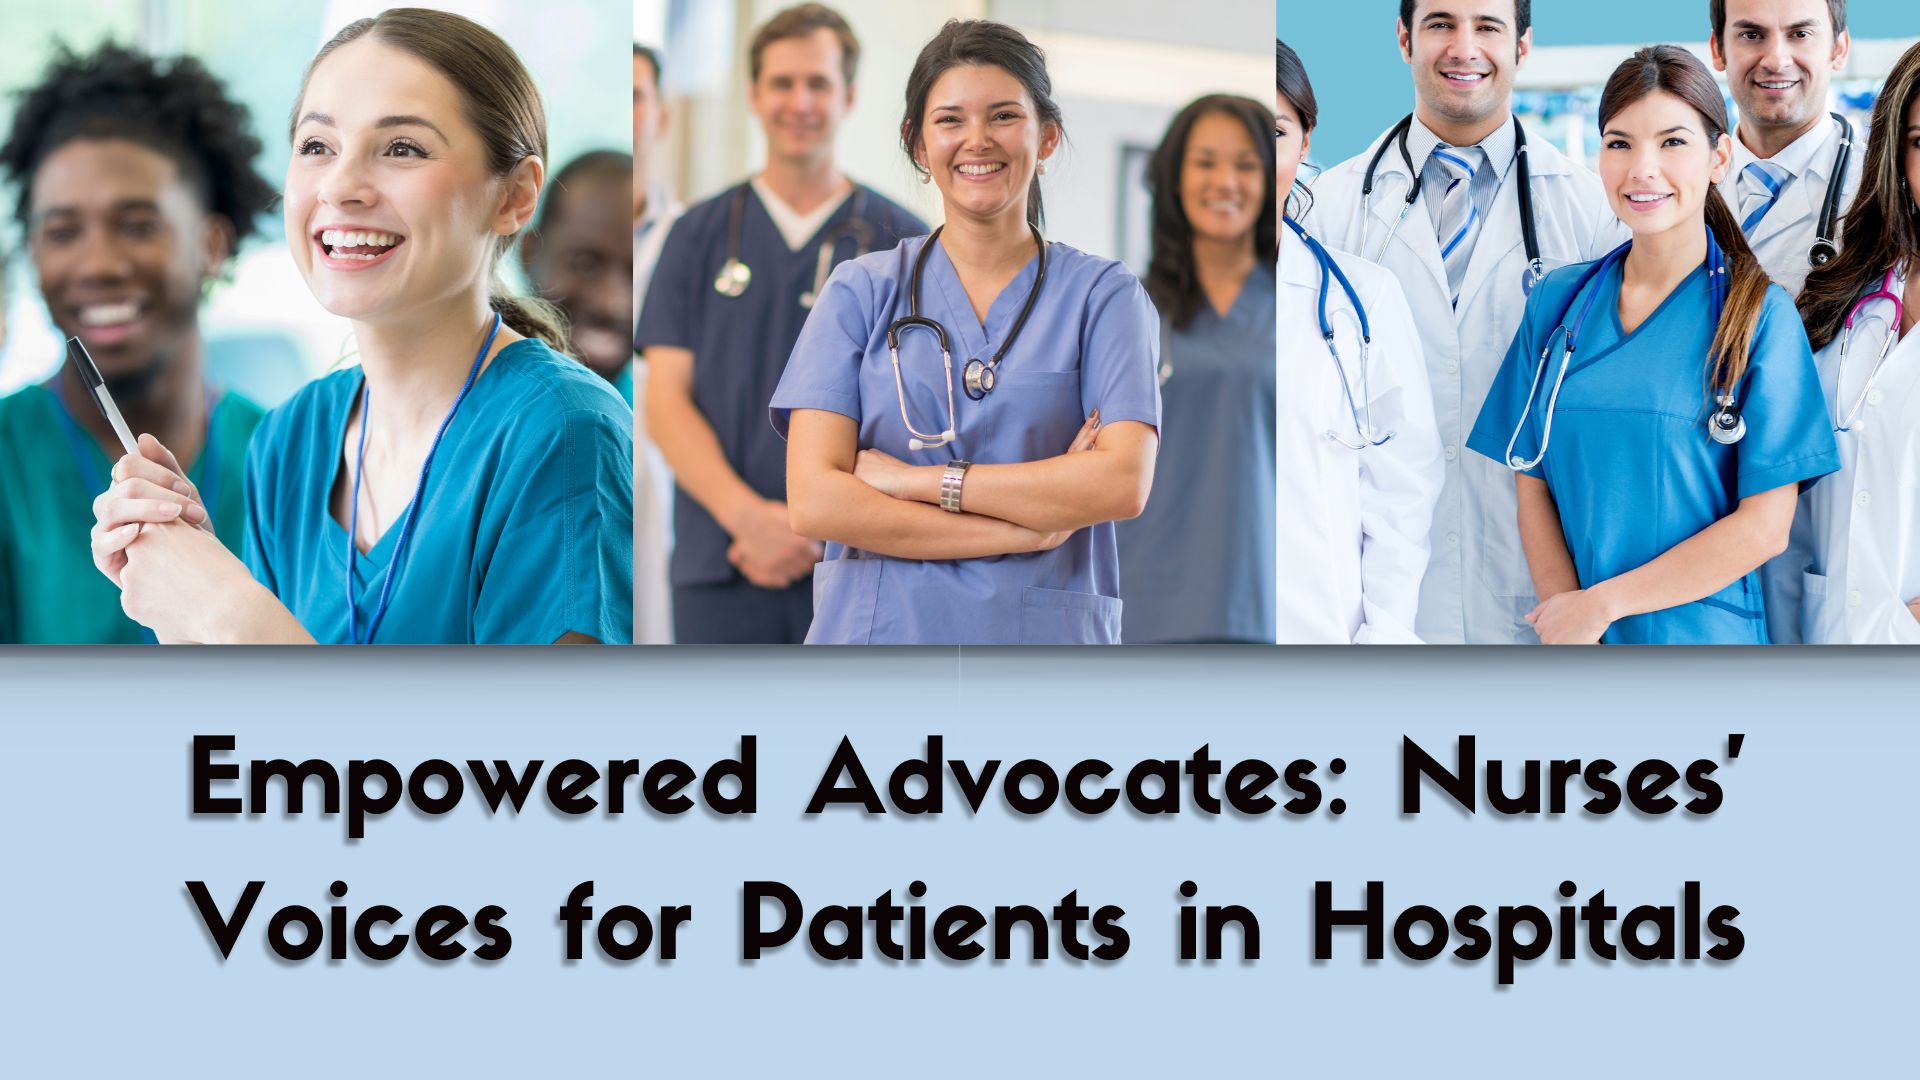 Empowered Advocates: Nurses’ Voices for Patients in Hospitals